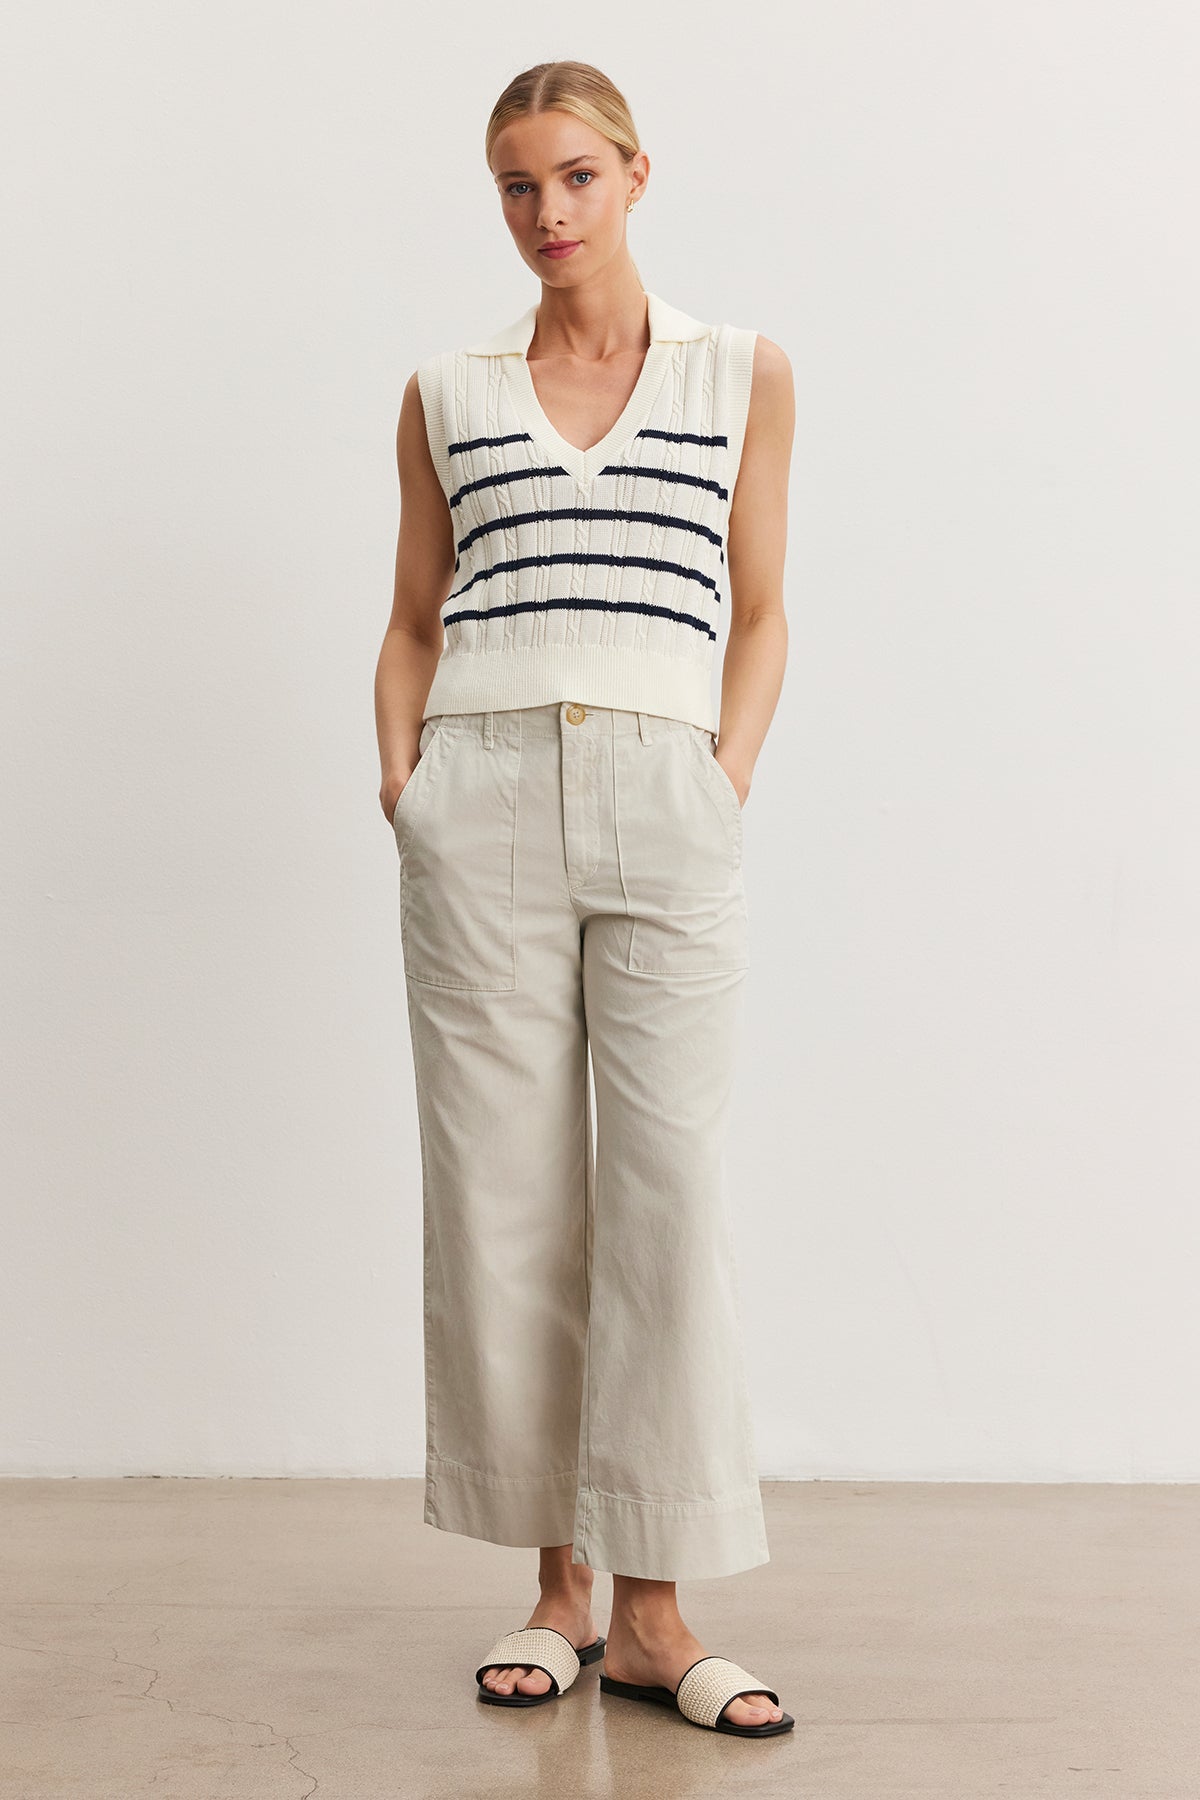 Woman in a sleeveless white top with blue stripes and light beige Velvet by Graham & Spencer MYA COTTON CANVAS PANT, standing in a studio, wearing black sandals.-36998760726721